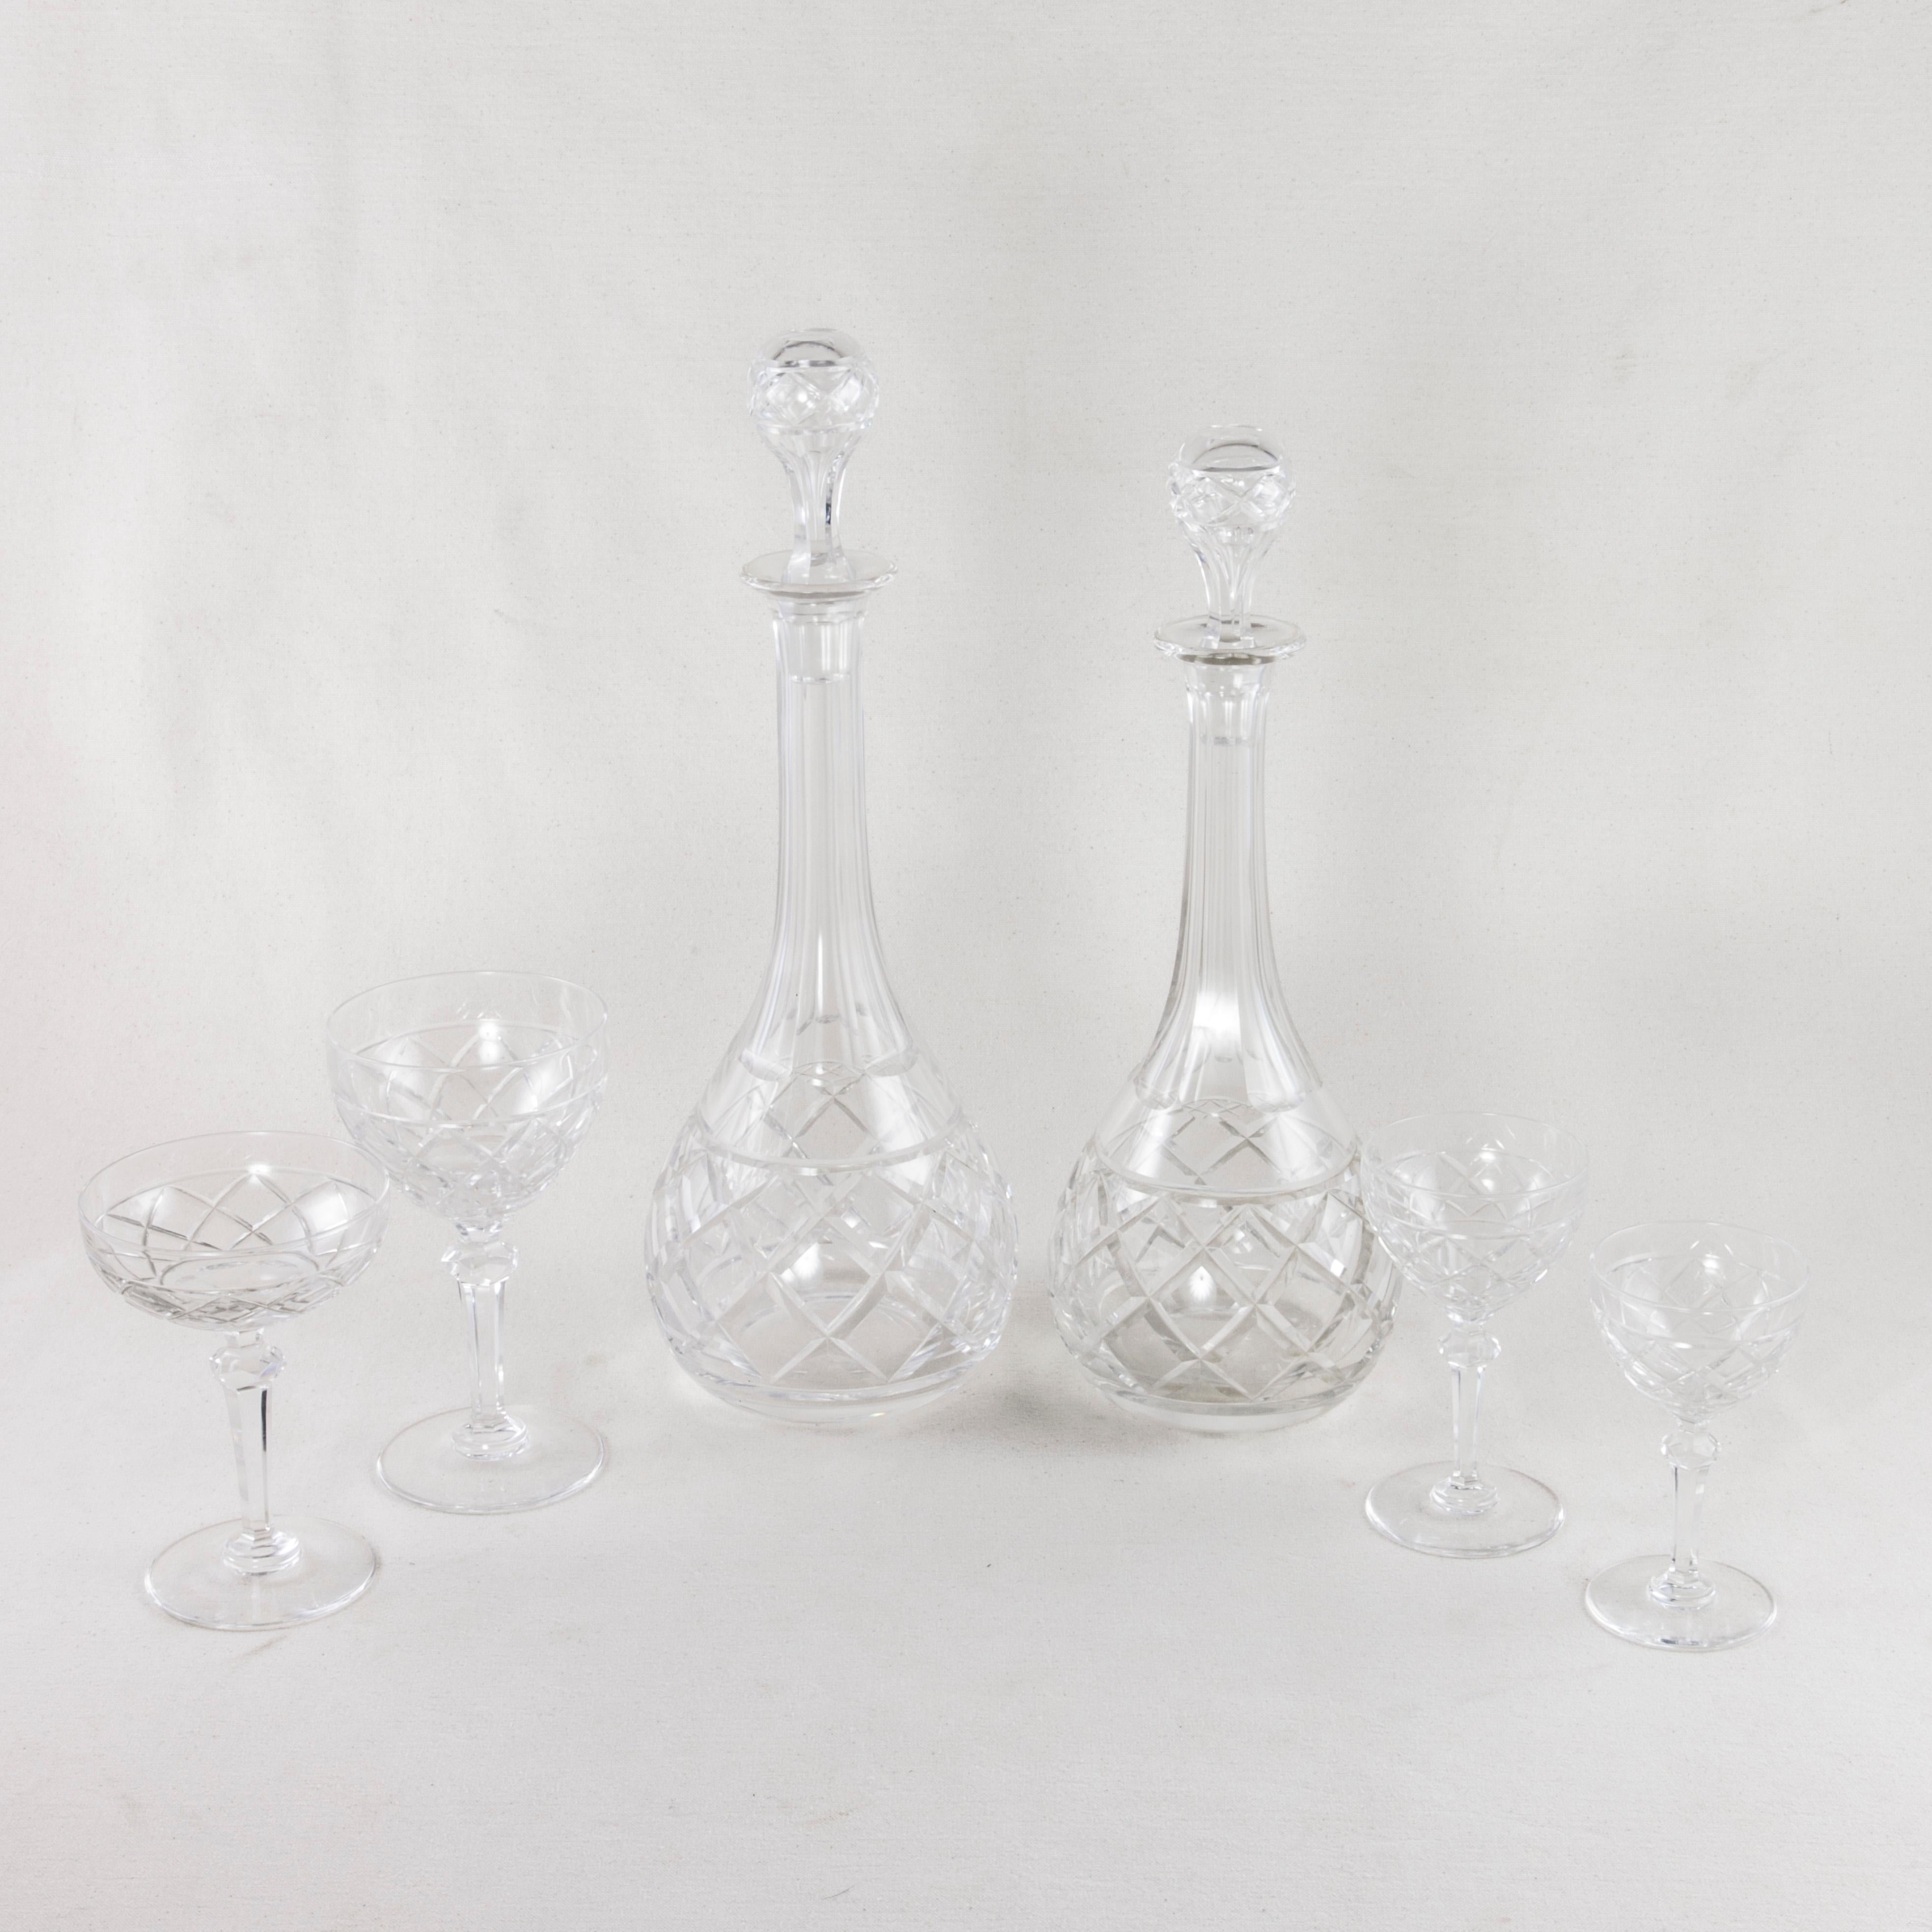 This 55-piece set of early 20th century French Baccarat cut crystal glassware features four different sizes of glasses: twelve champagne, ten red wine, ten white wine, and ten liqueur. Included are four decanters with stoppers, a pair of vases, and